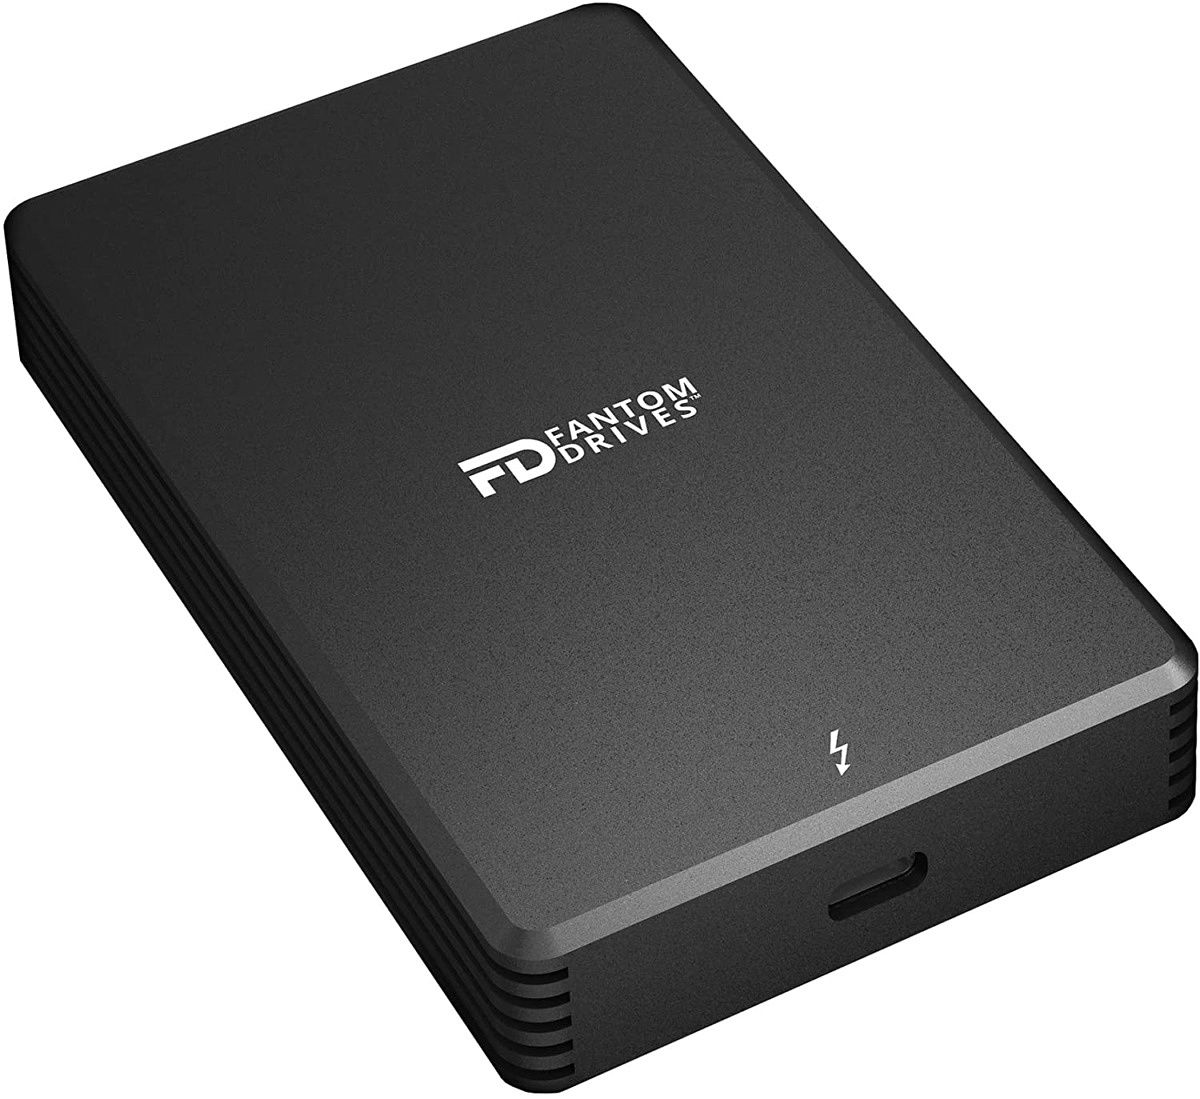 If you don't need the ultra-rugged durability of the G-Drive Pro, this SSD from Fantom Drives is just as fast - with 2,800MB/s reads and 2,400MB/s writes - but with a more simplified design. It's also slightly cheaper, so that's another reason why you might prefer it to SanDisk's offering.